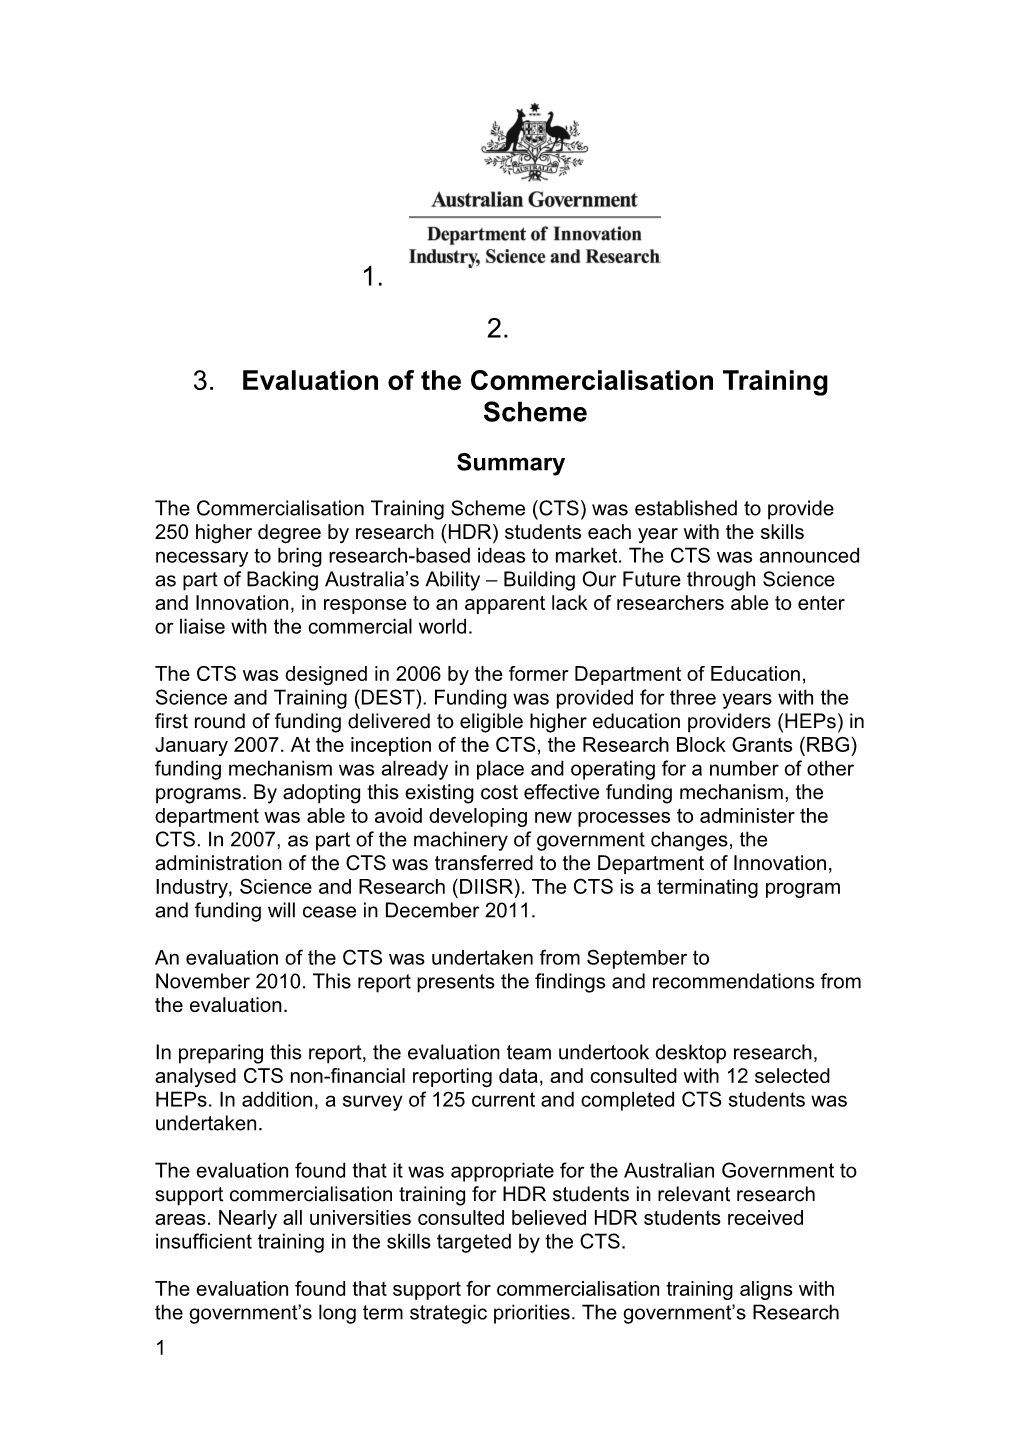 Evaluation of the Commercialisation Training Scheme - Summary Report